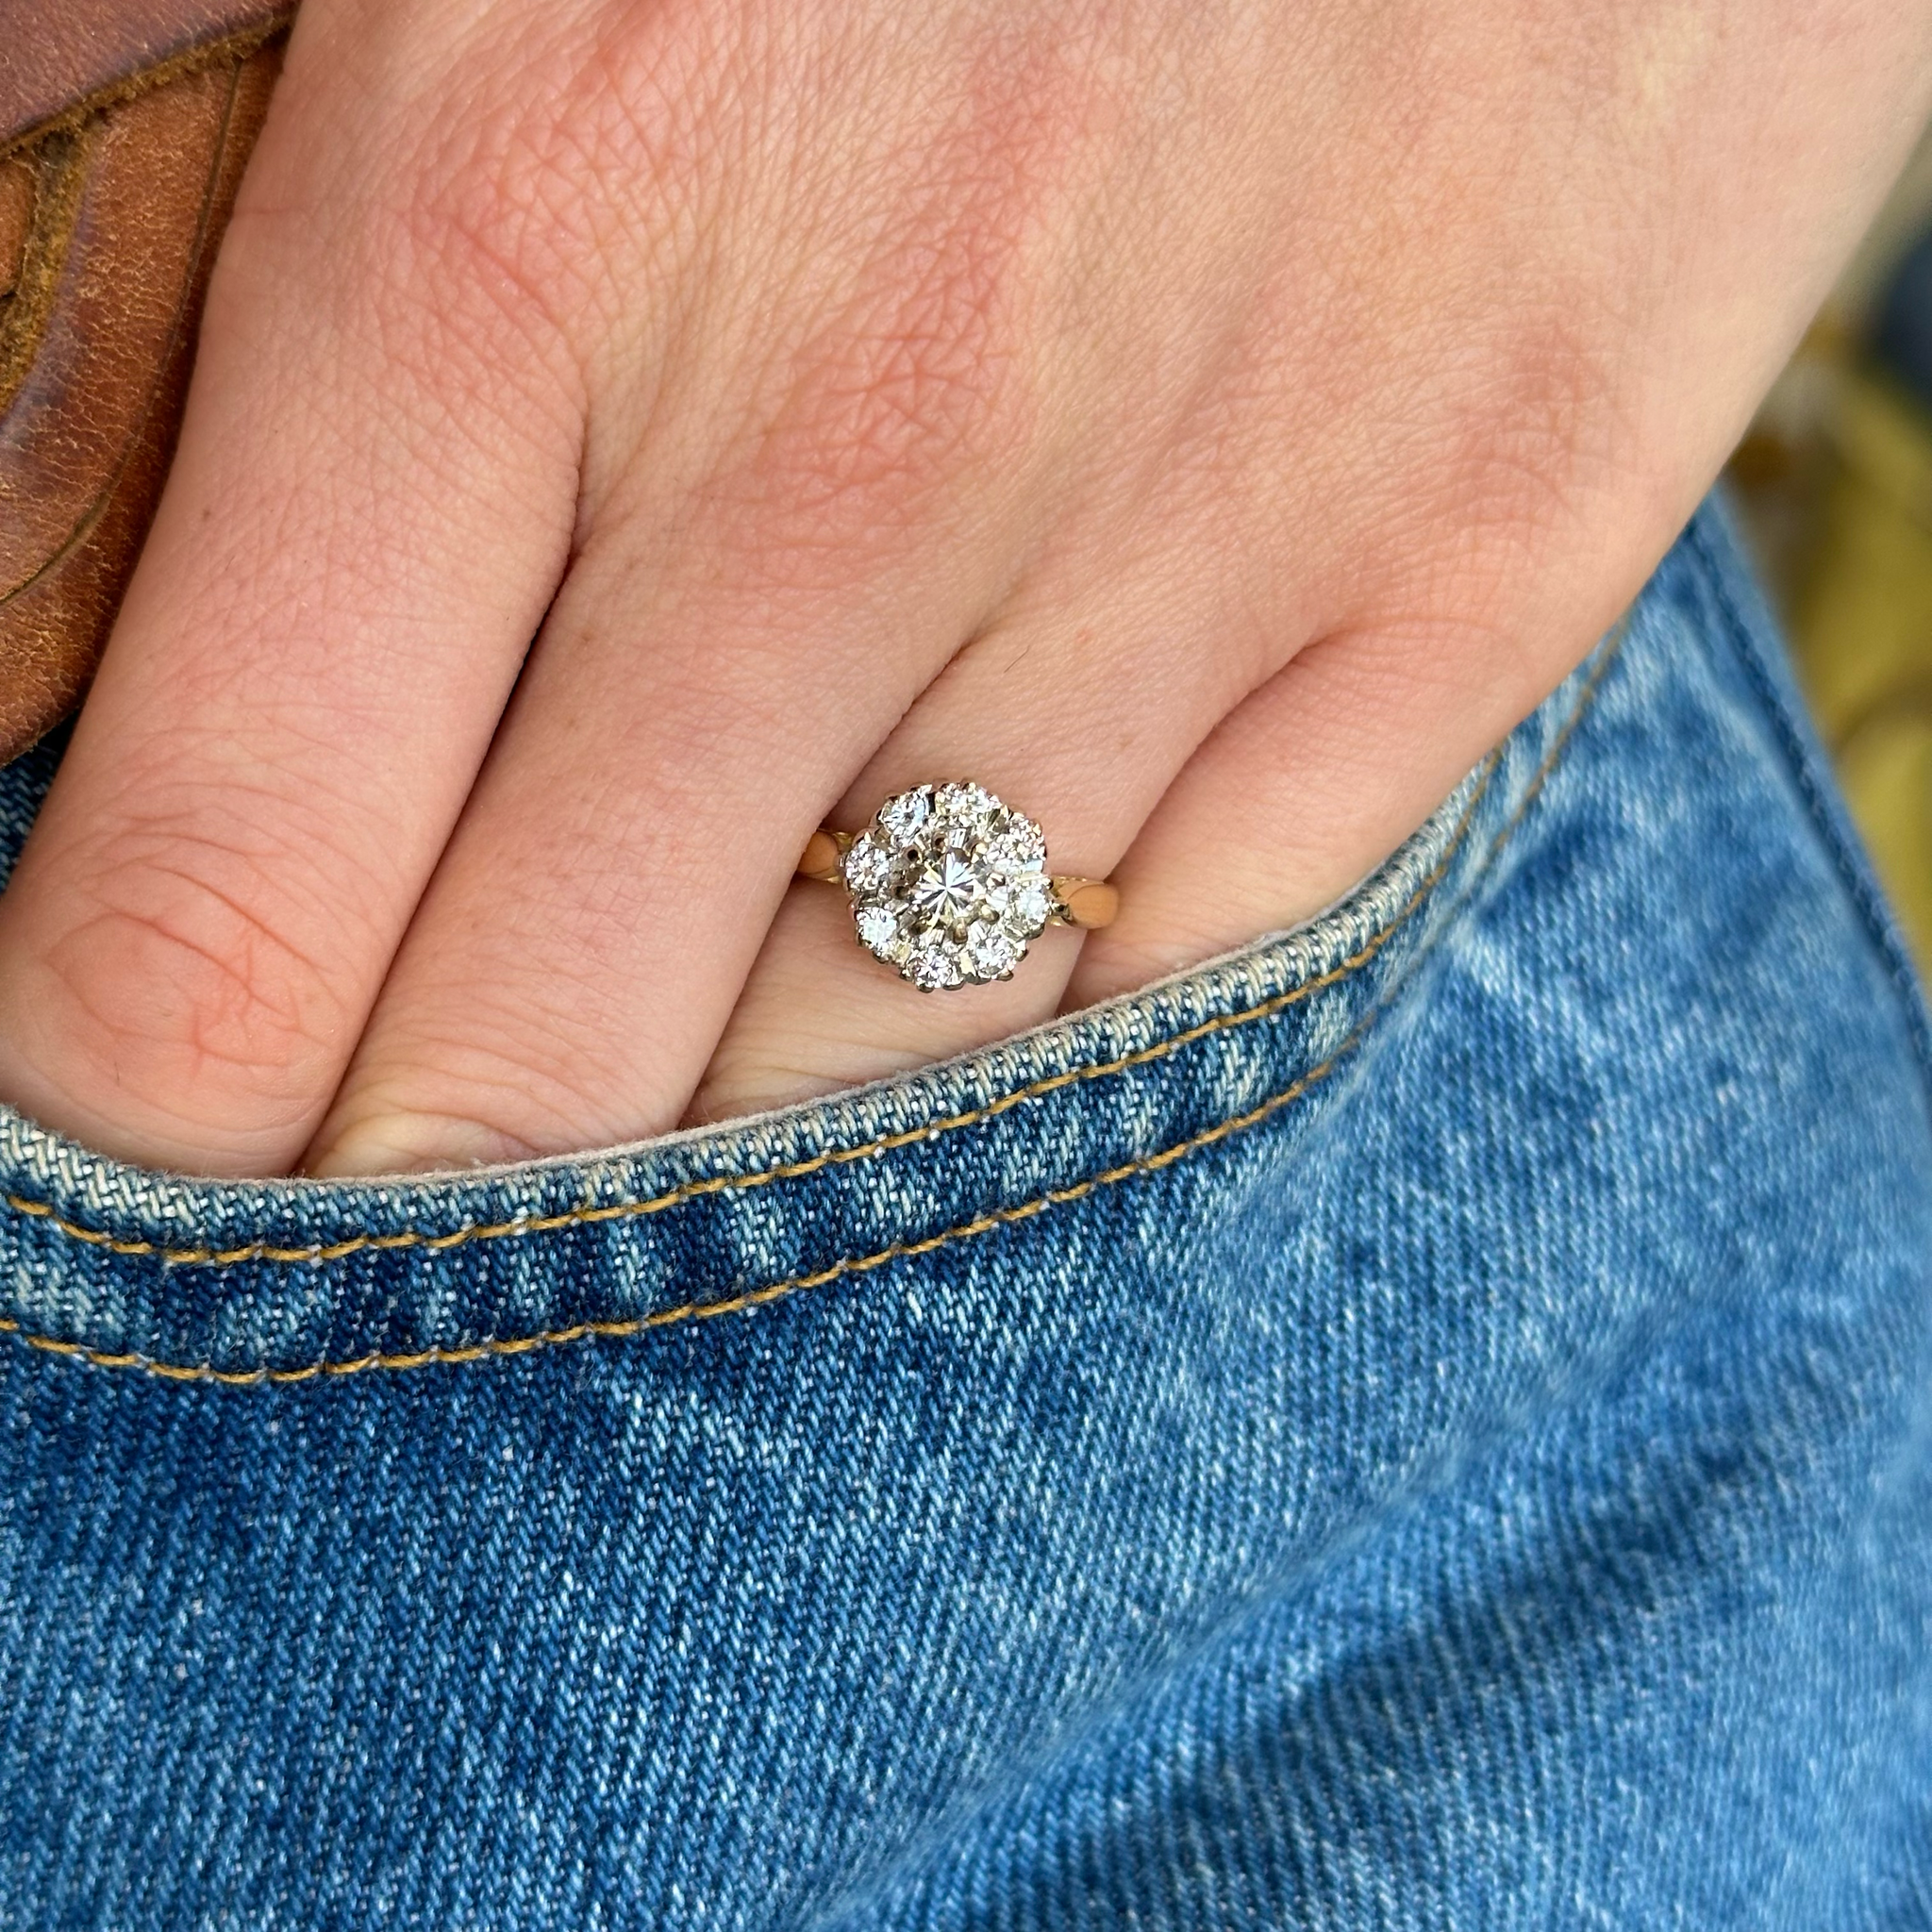 Antique, Edwardian Diamond Cluster Engagement Ring, 18ct Yellow Gold and Platinum worn on hand in pocket of jeans